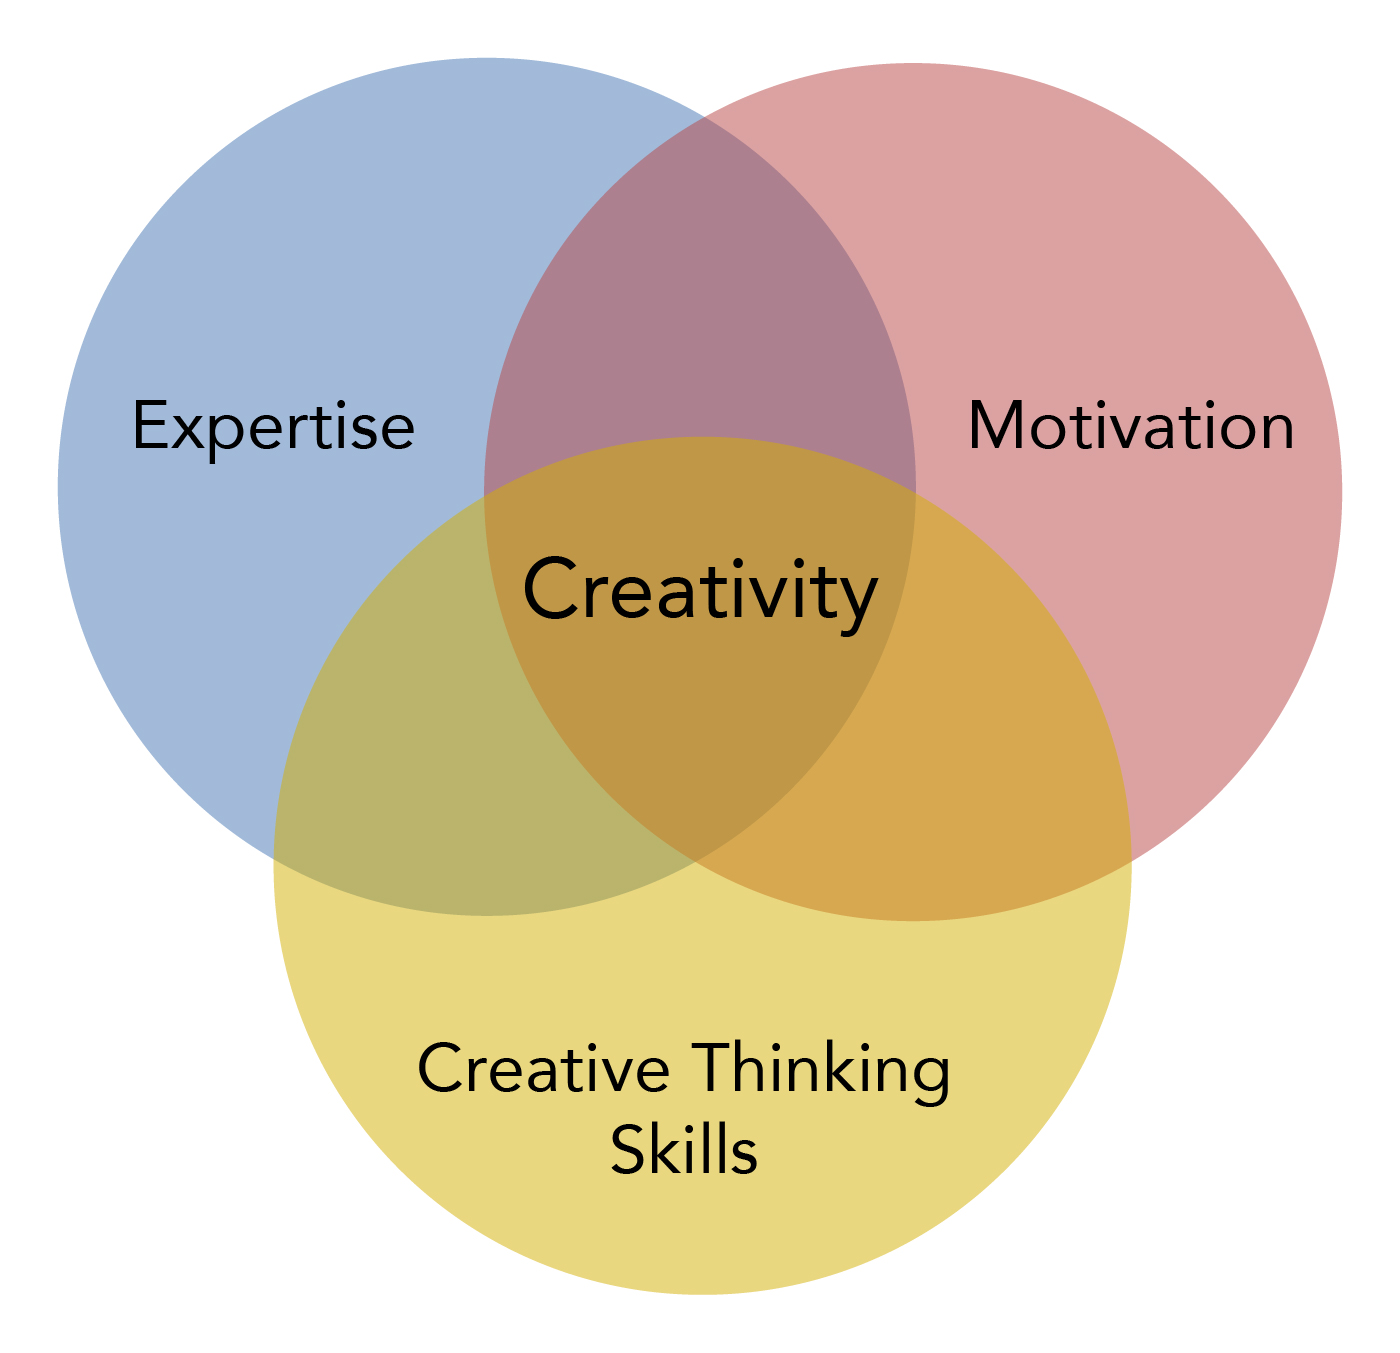 Three components of creativity. Expertise, Creative Thinking Skills, and Motivation come together to make creativity.